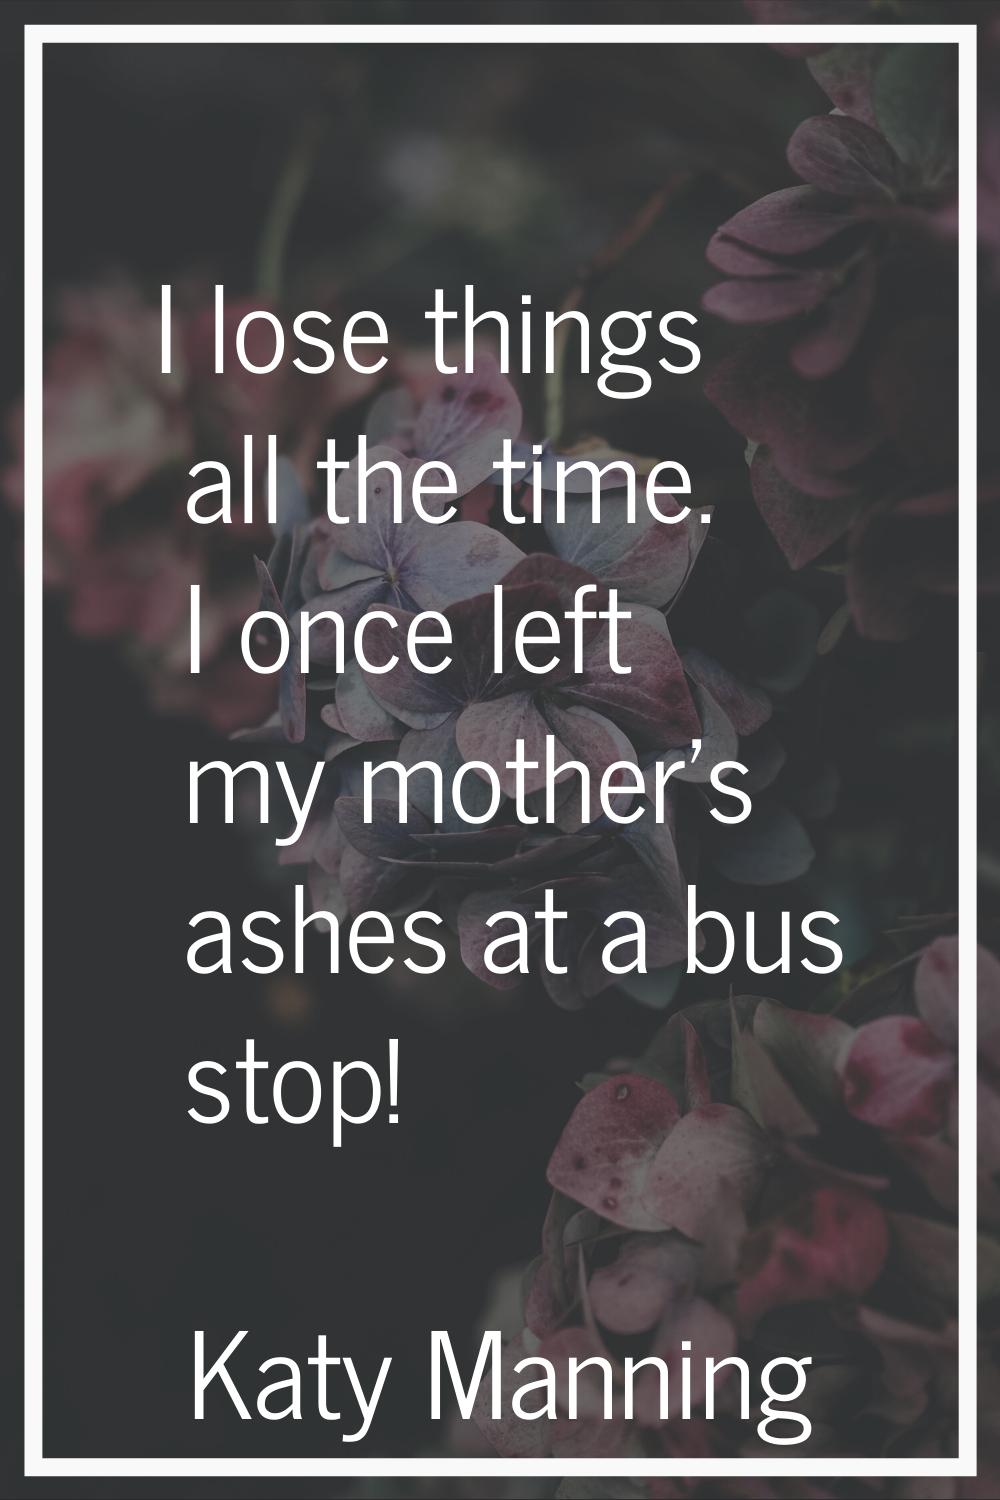 I lose things all the time. I once left my mother's ashes at a bus stop!